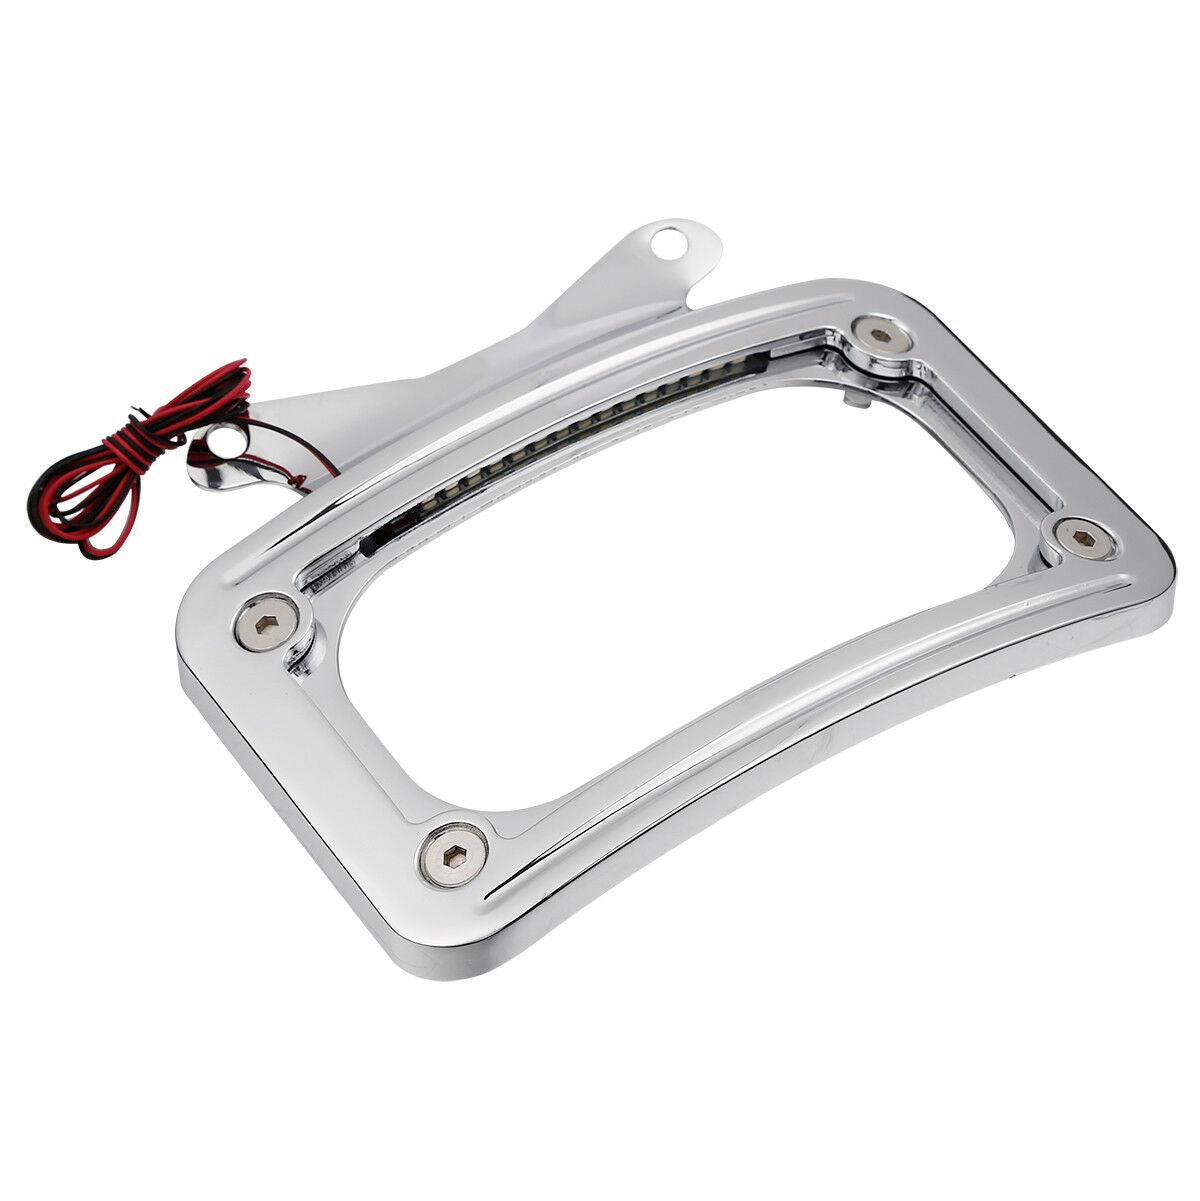 Curved Laydown License Plate Mount Frame Light Fit For Harley Road King Glide US - Moto Life Products